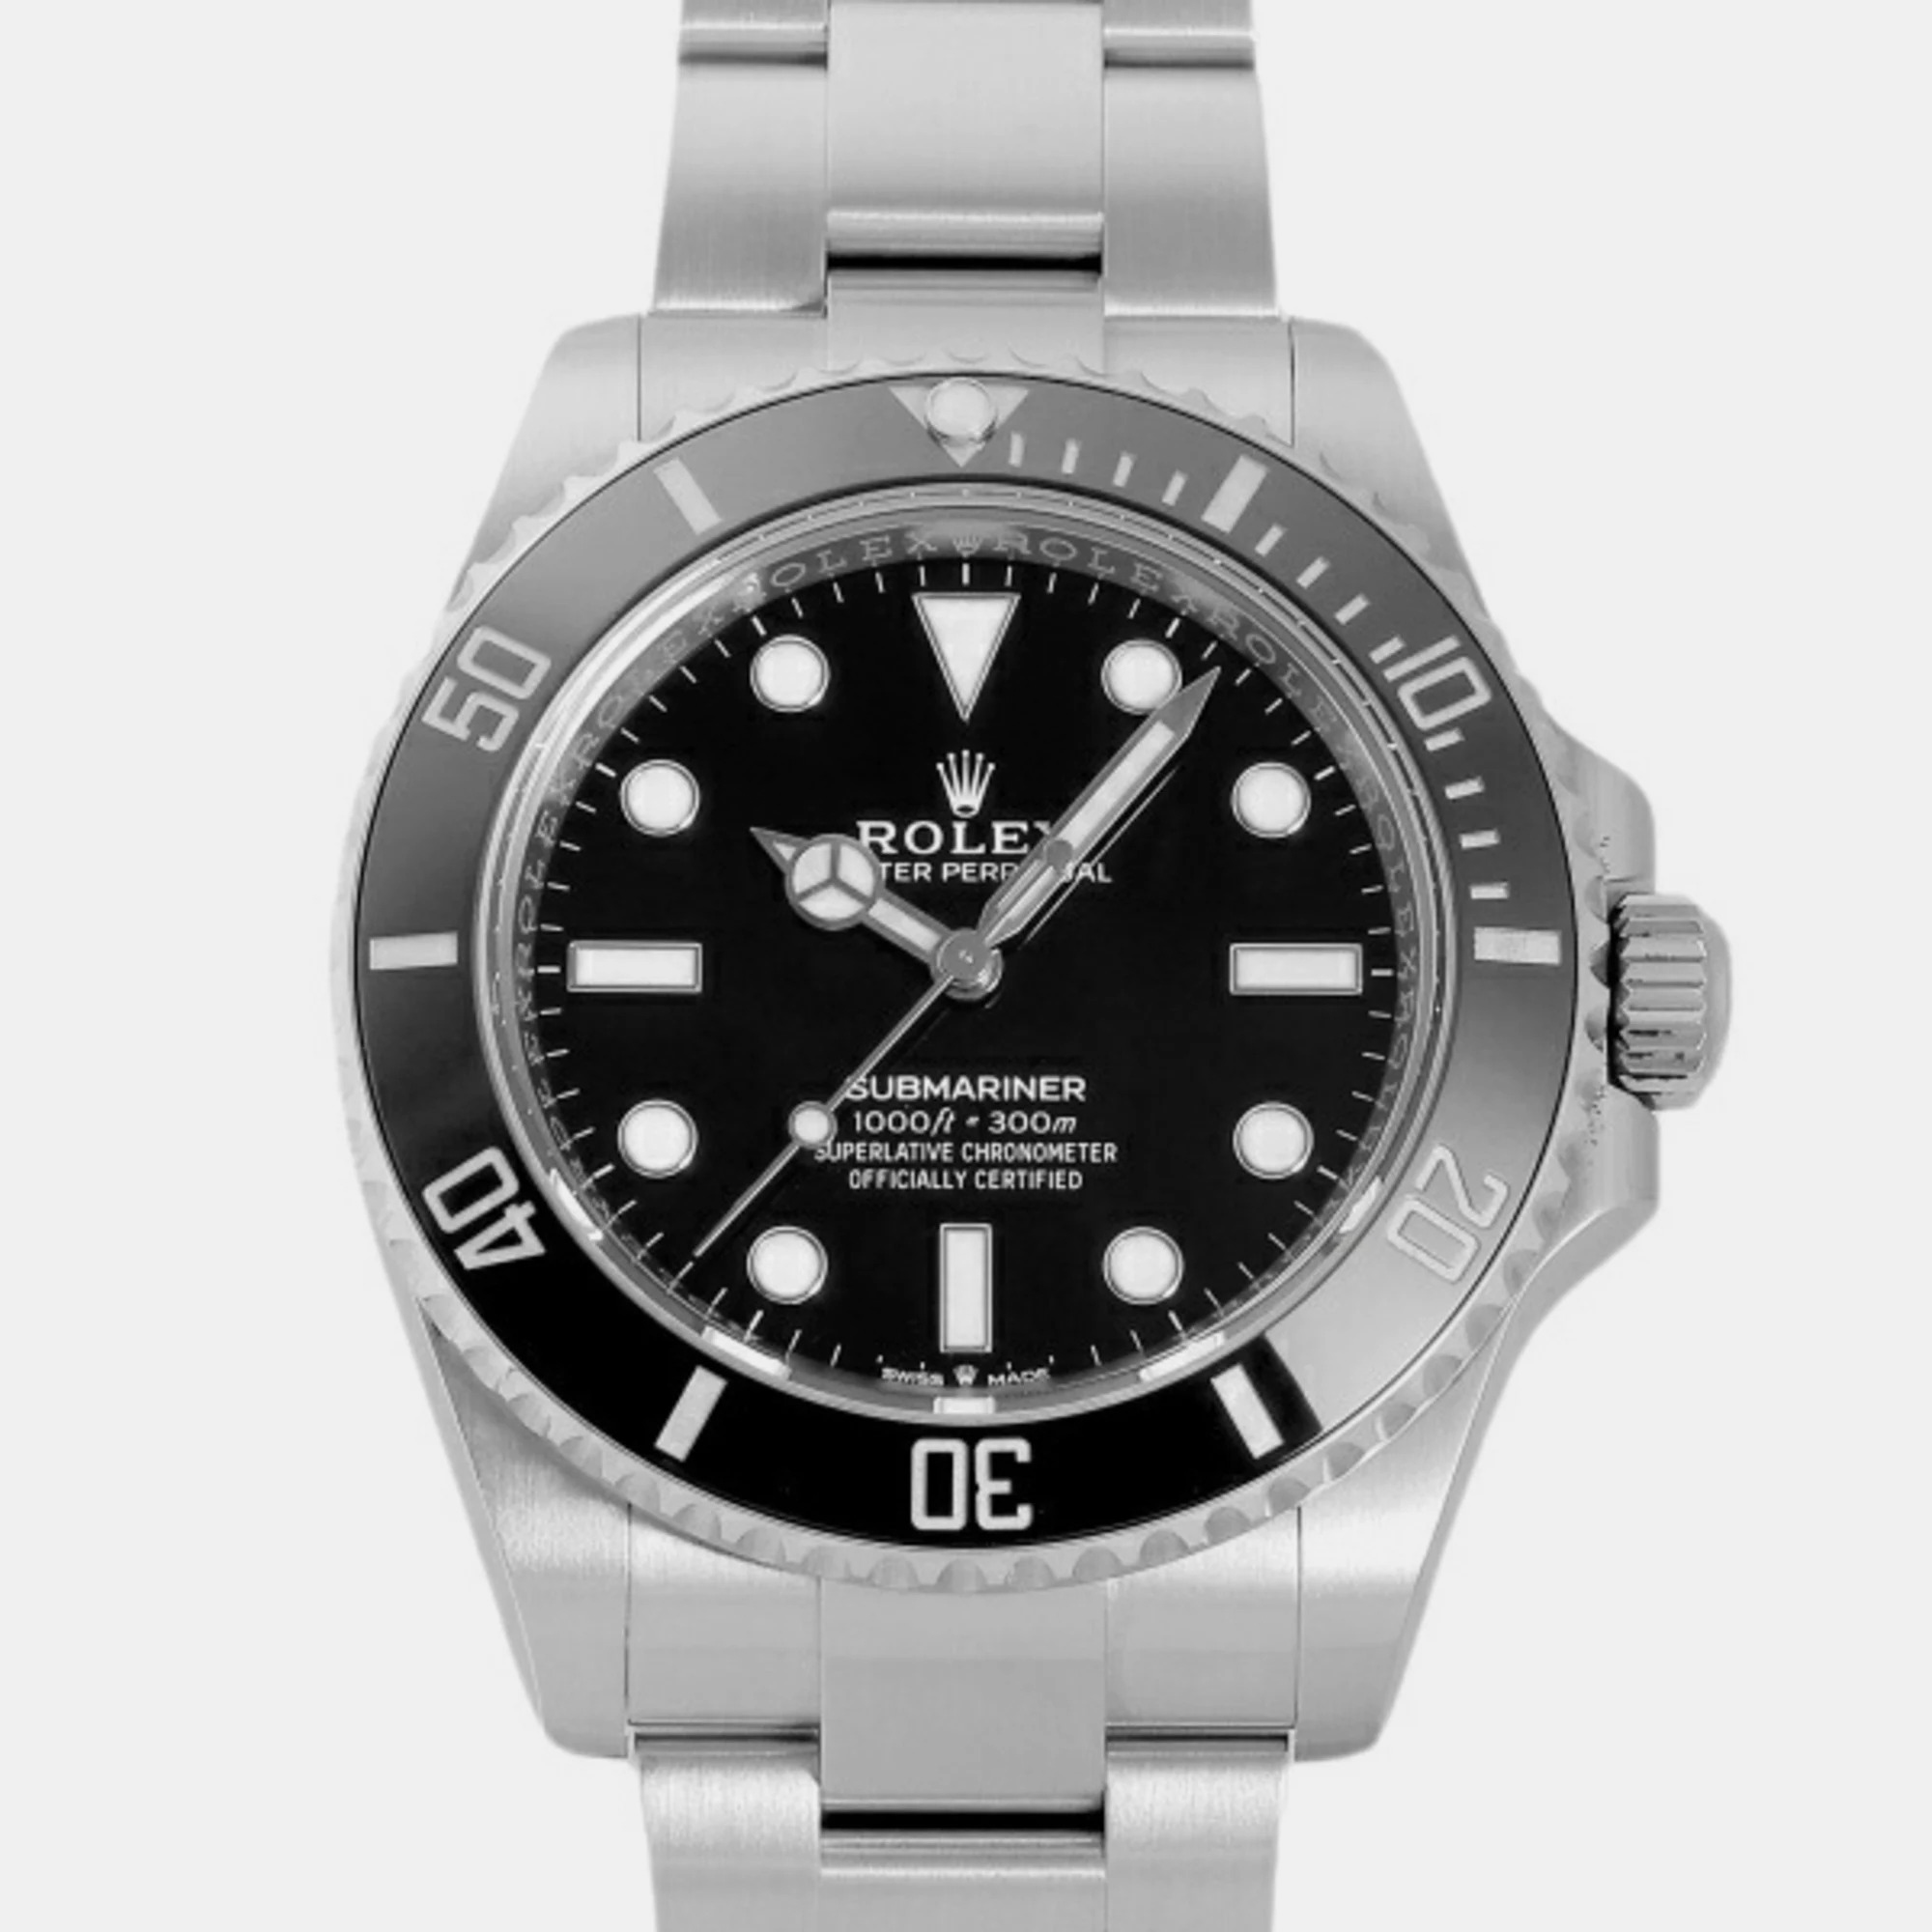 Rolex Black Stainless Steel And Ceramic Submariner 124060 Automatic Men's Wristwatch 41 Mm